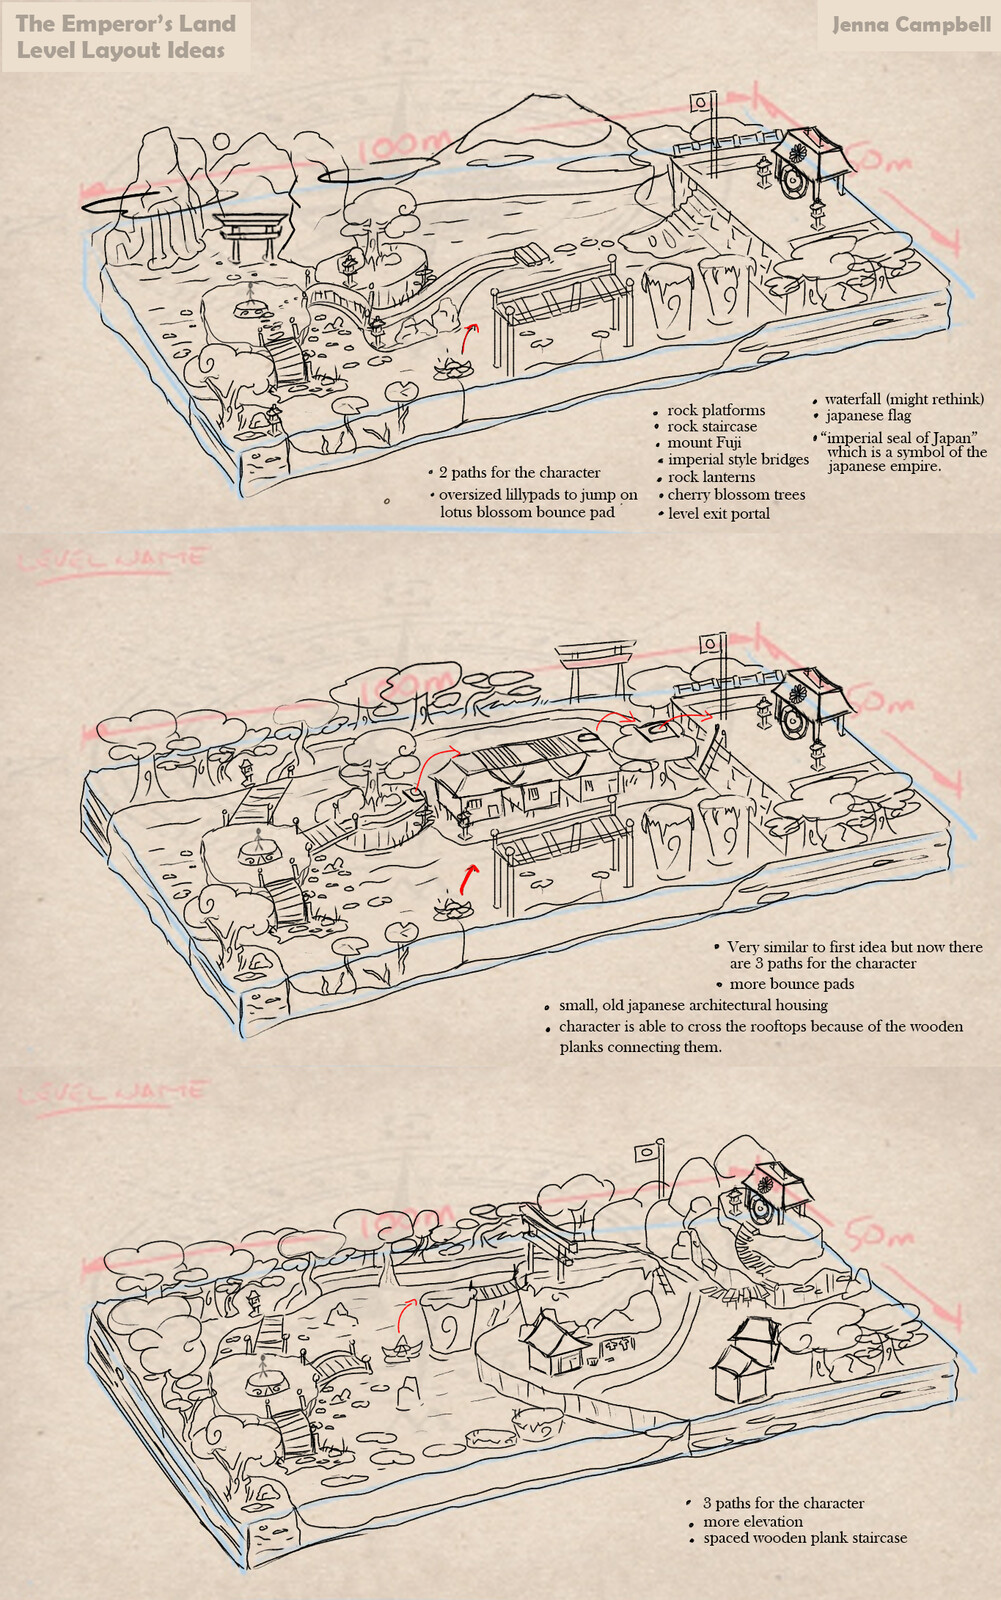 Early Stage - Sketches of three different level layouts for the same location and concept